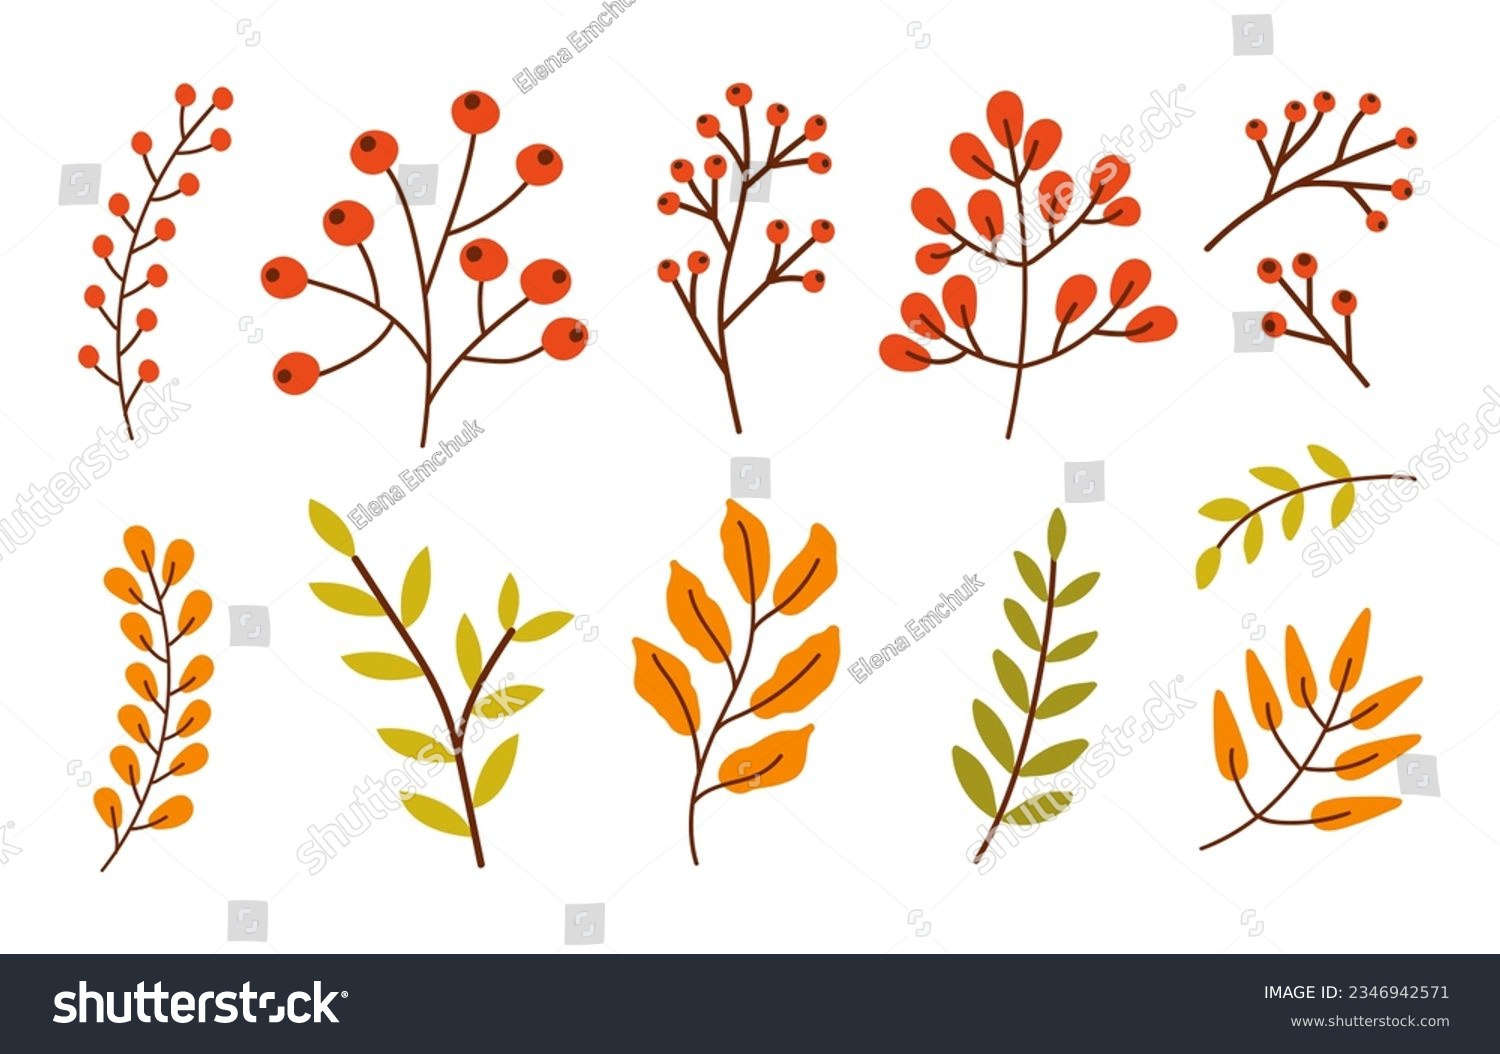 Colorful set of different branches with leaves, red berries isolated on a white background. Vector illustration #2346942571